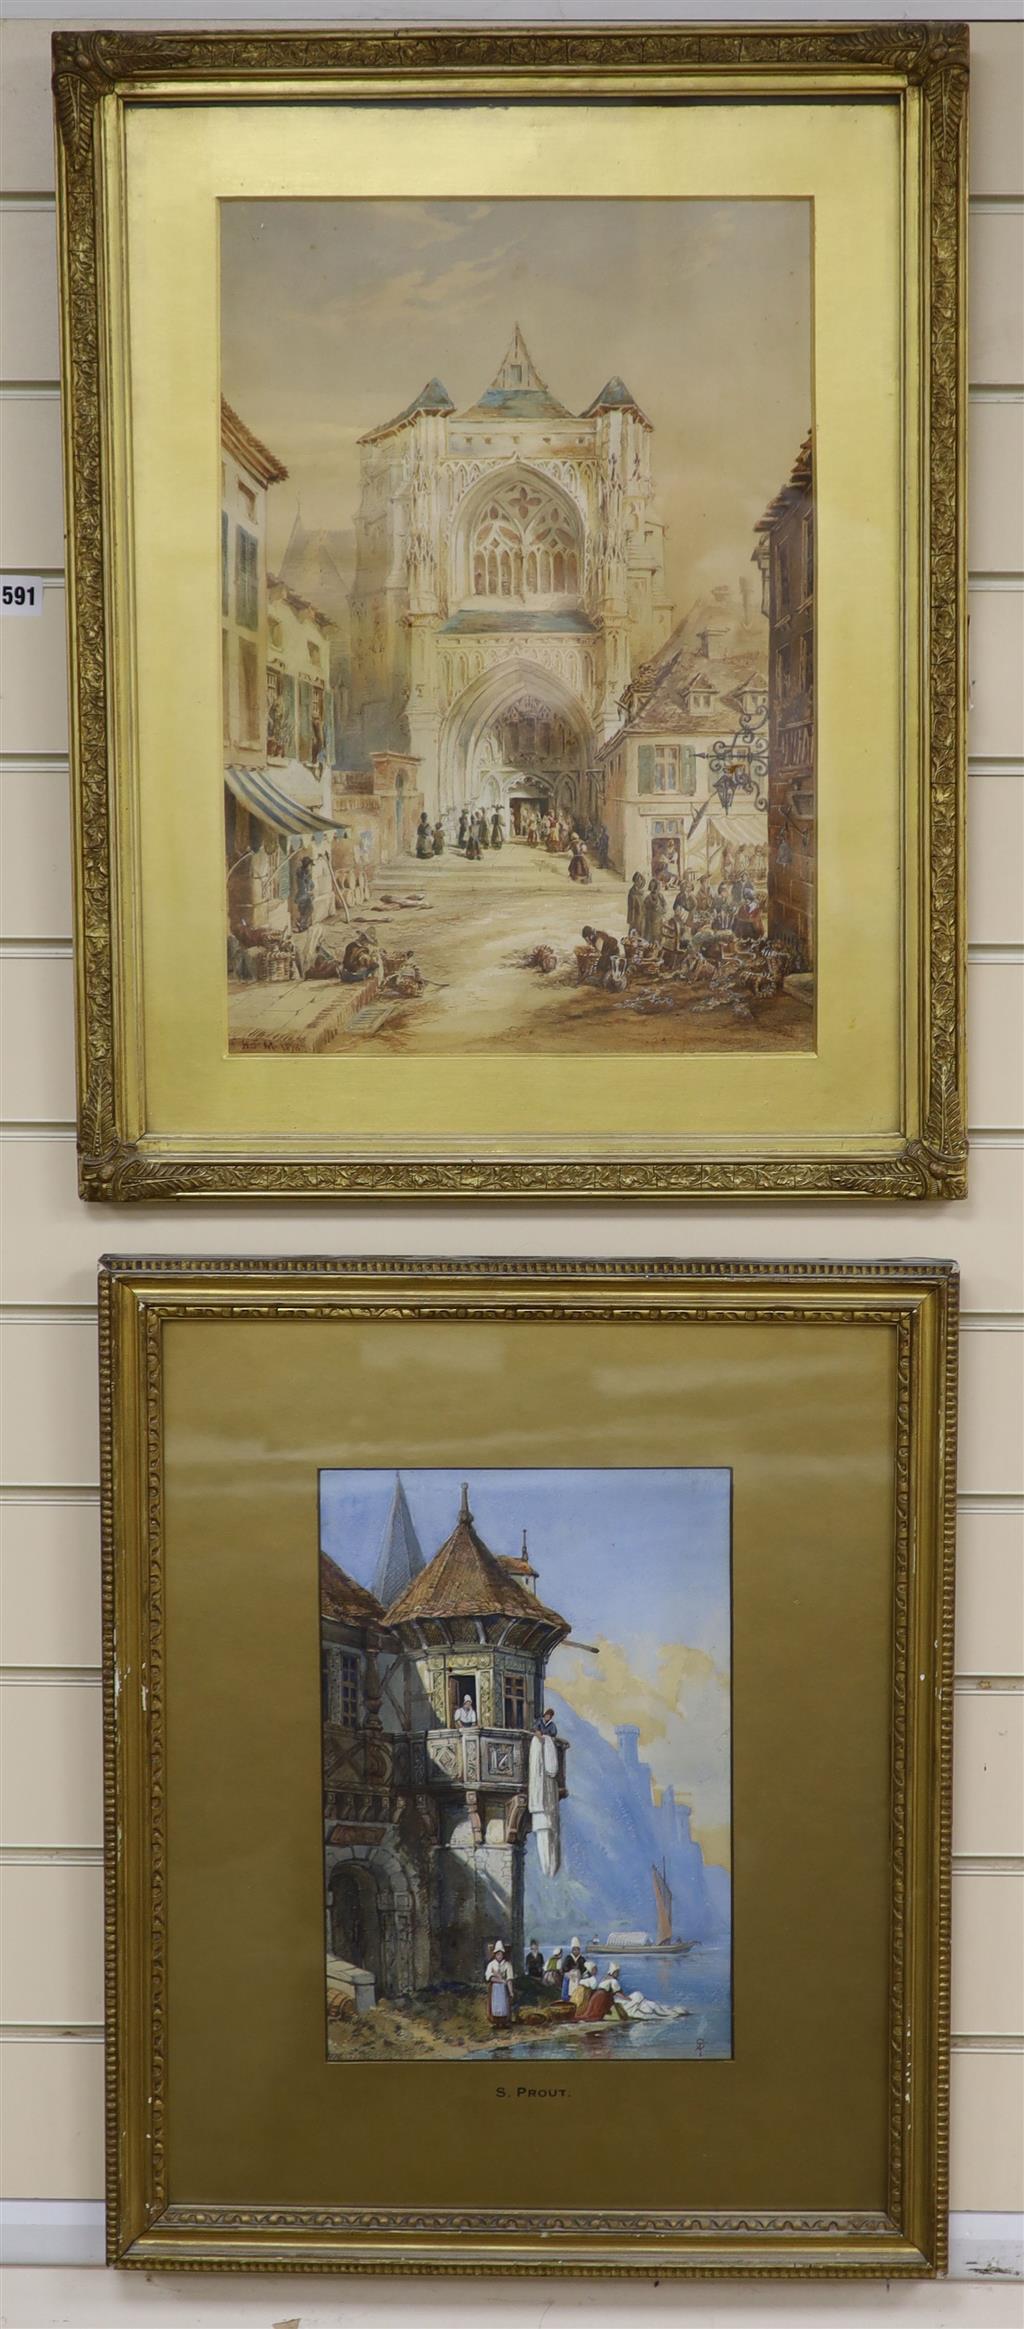 After Samuel Prout, watercolour, Lakeside houses, bears monogram, 33 x 22cm, and a watercolour of a Flemish cathedral, 45 x 31cm